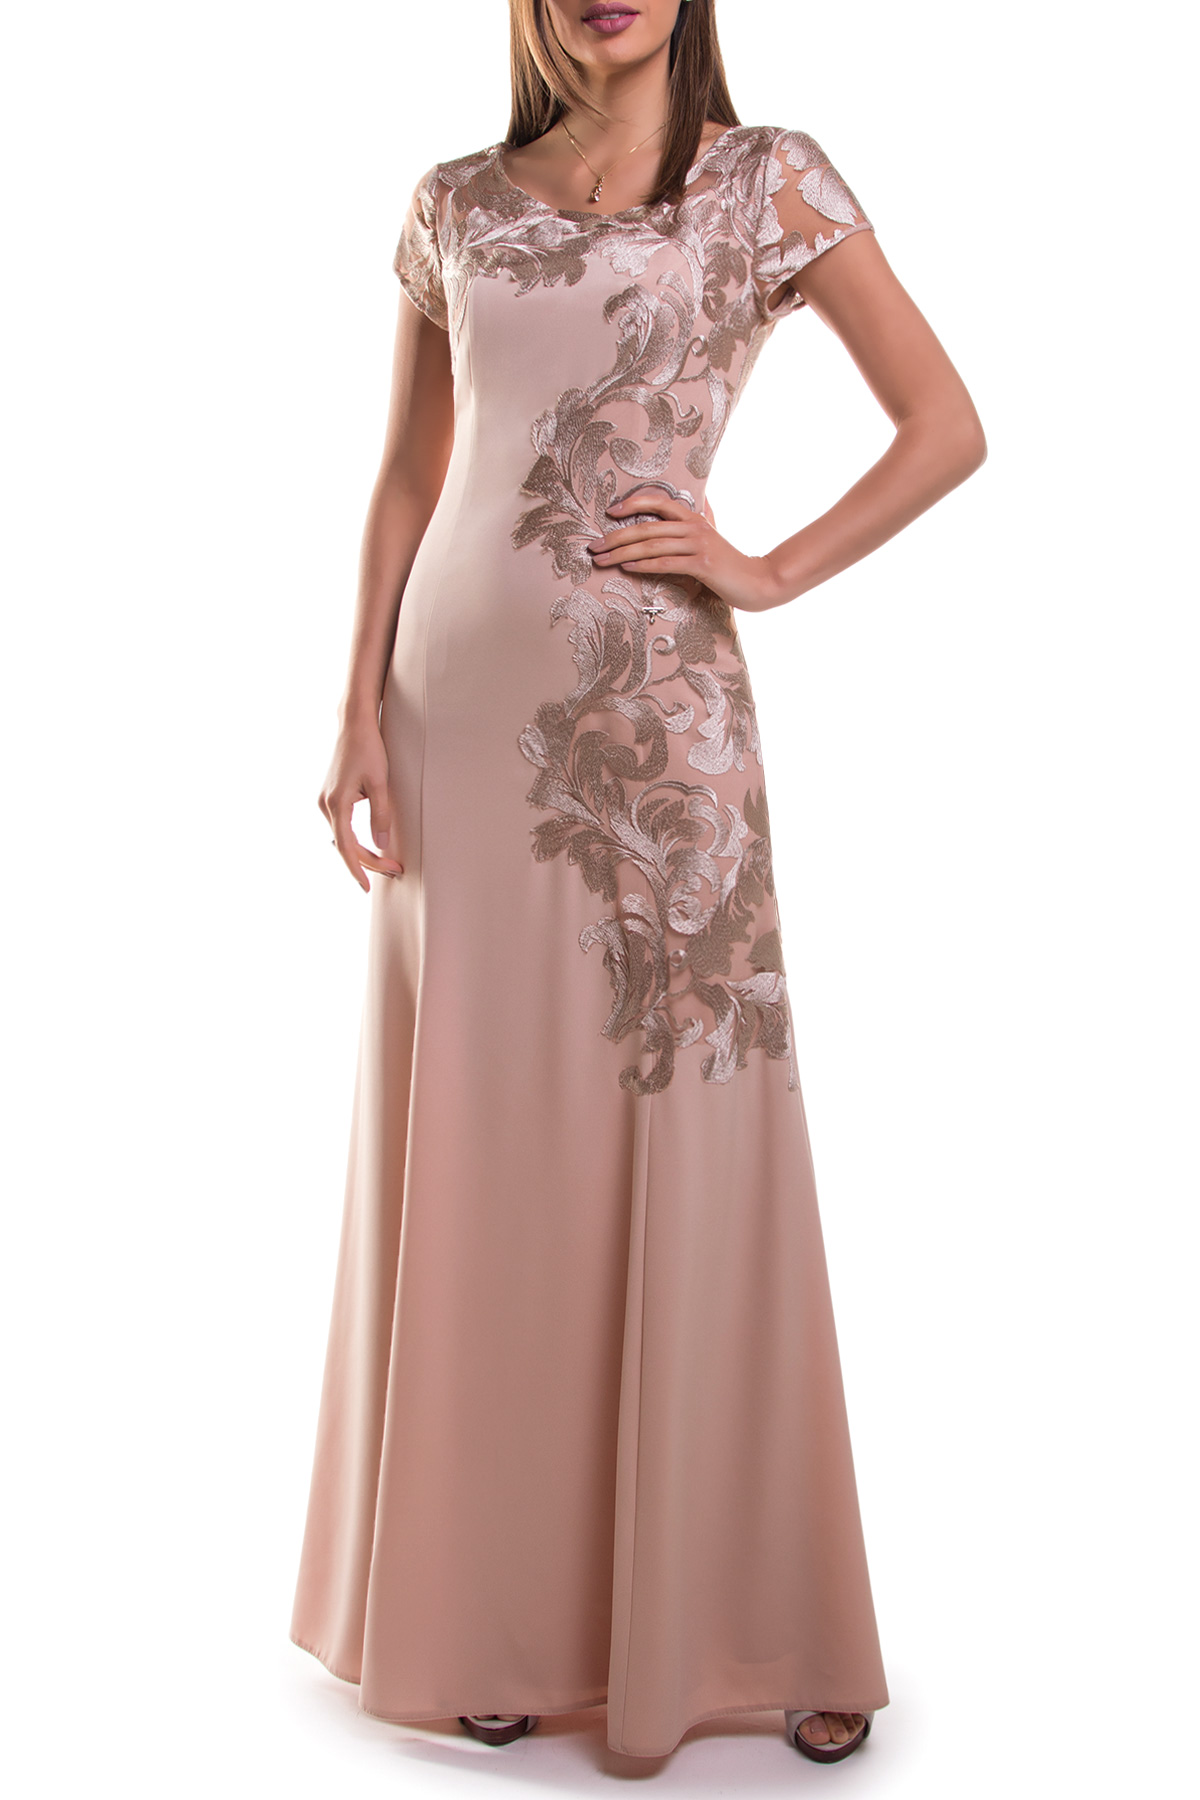 Elegant Luna long dress with a lace application in the